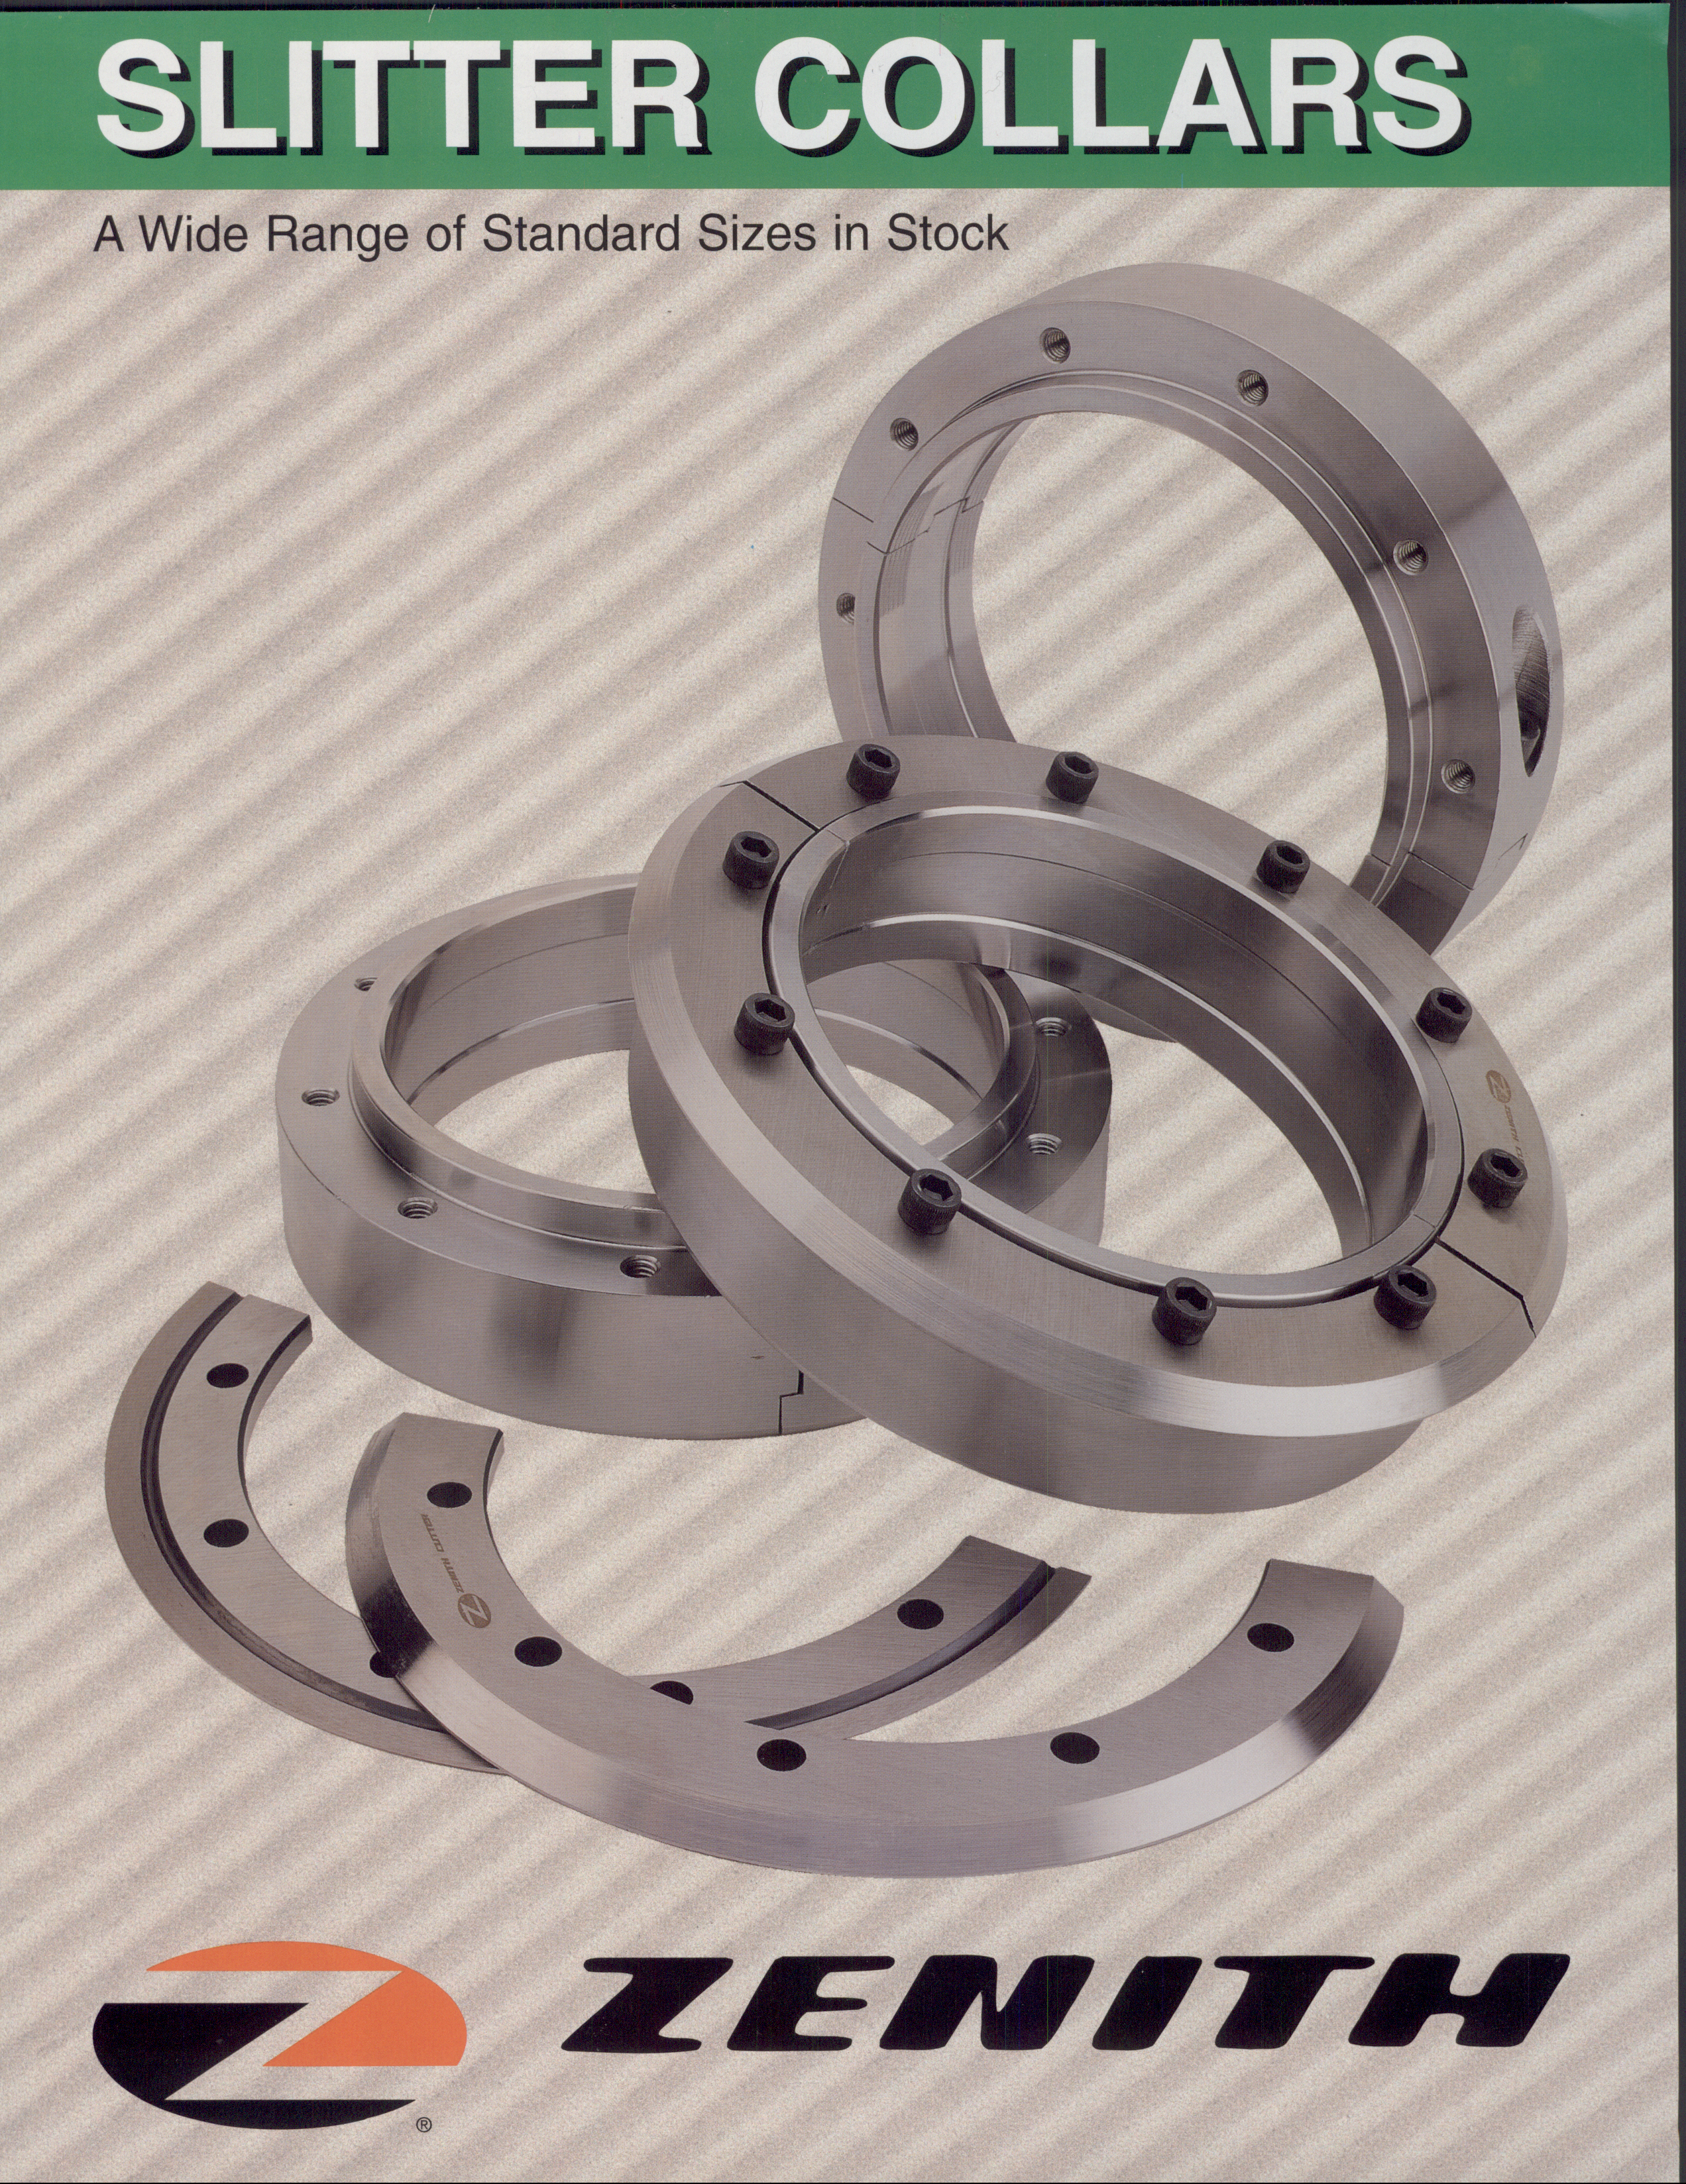 Read more about Slitter Collars in the Zenith Cutter brochure